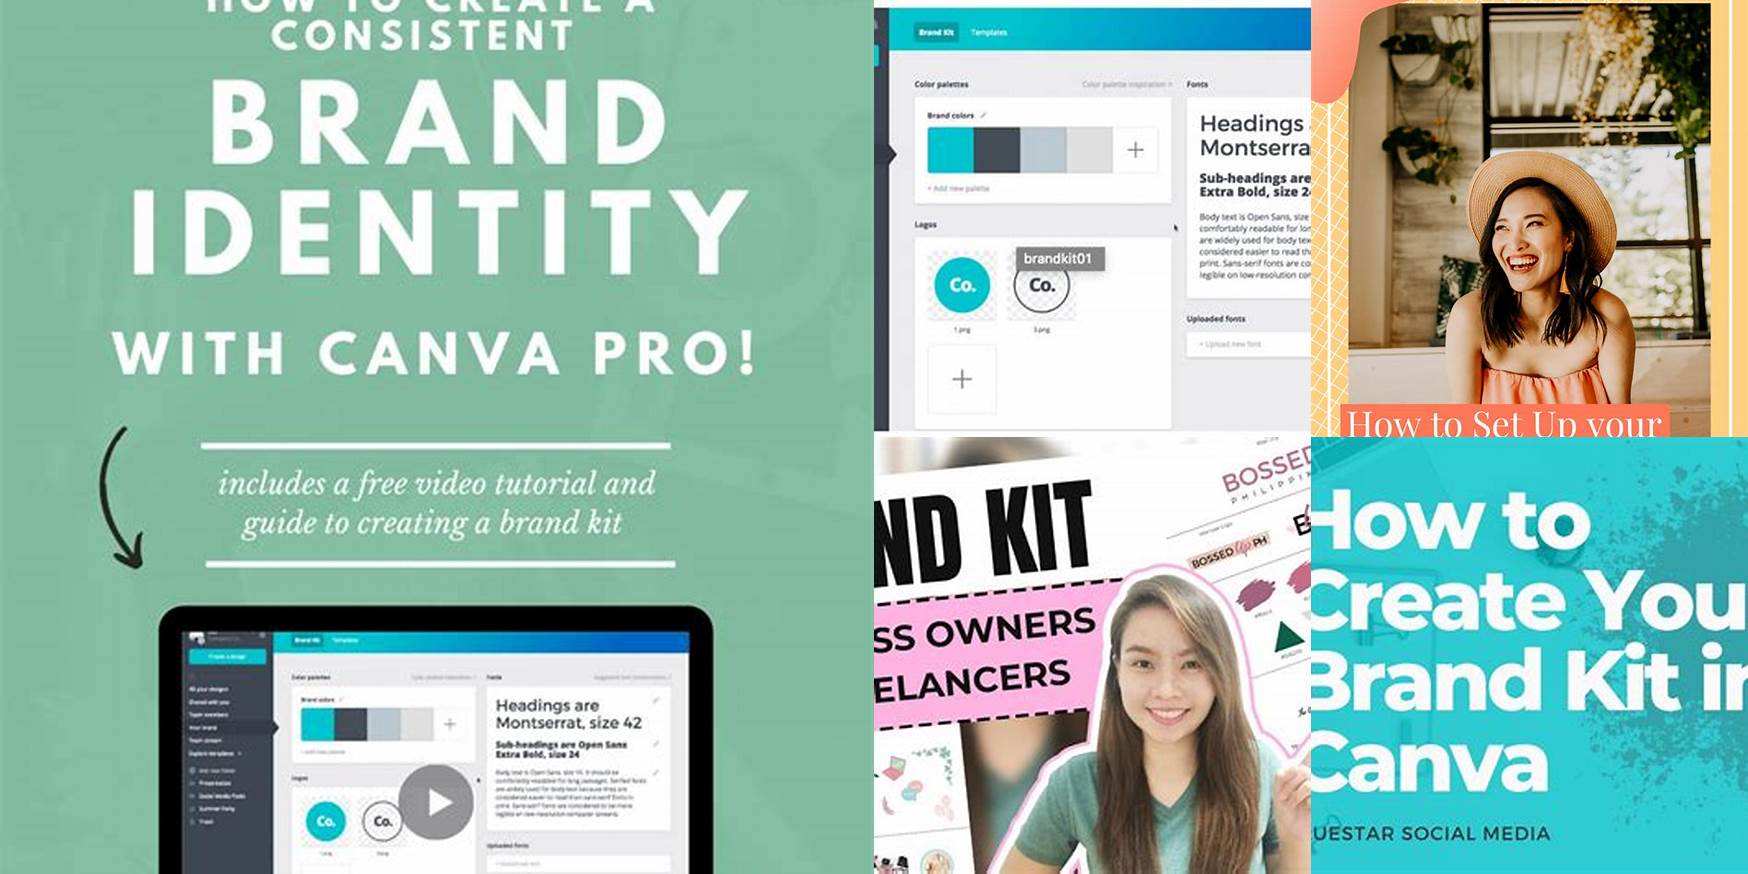 How To Share Brand Kit In Canva